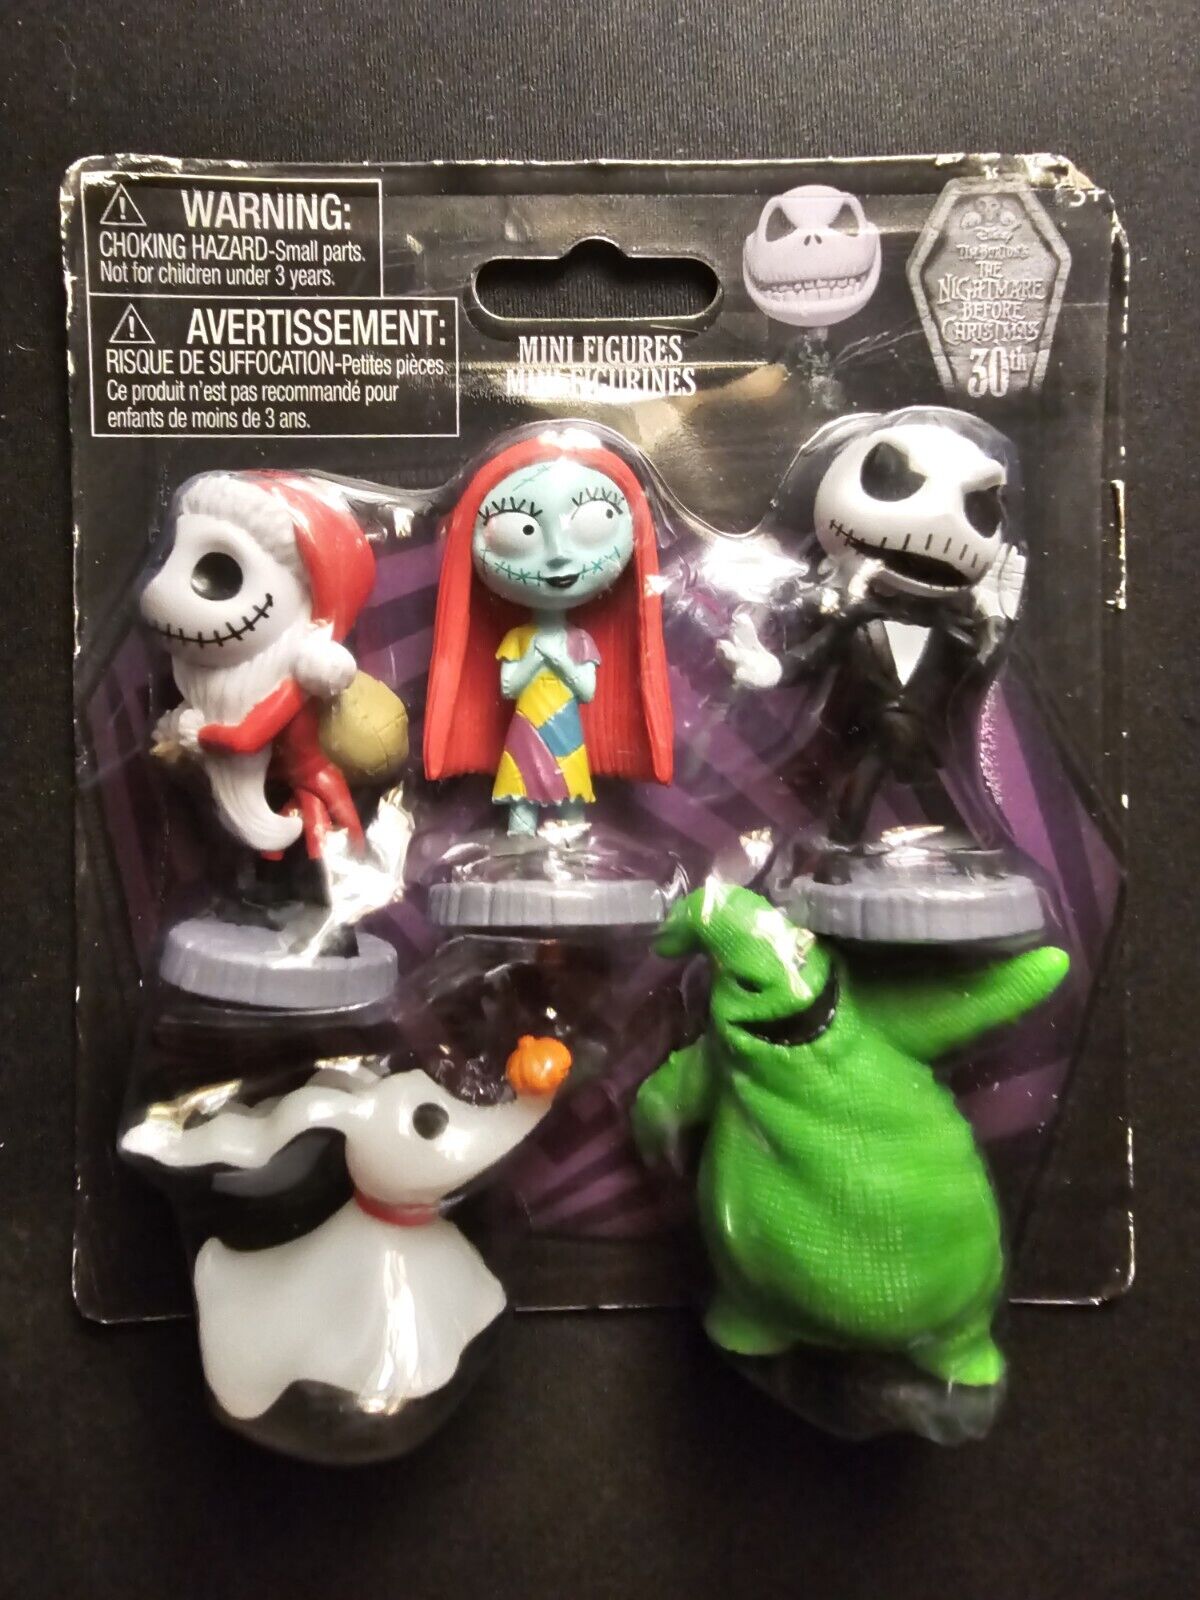 The Nightmare Before Christmas Disney 30th - Mini Figurines 2.5 Inch New